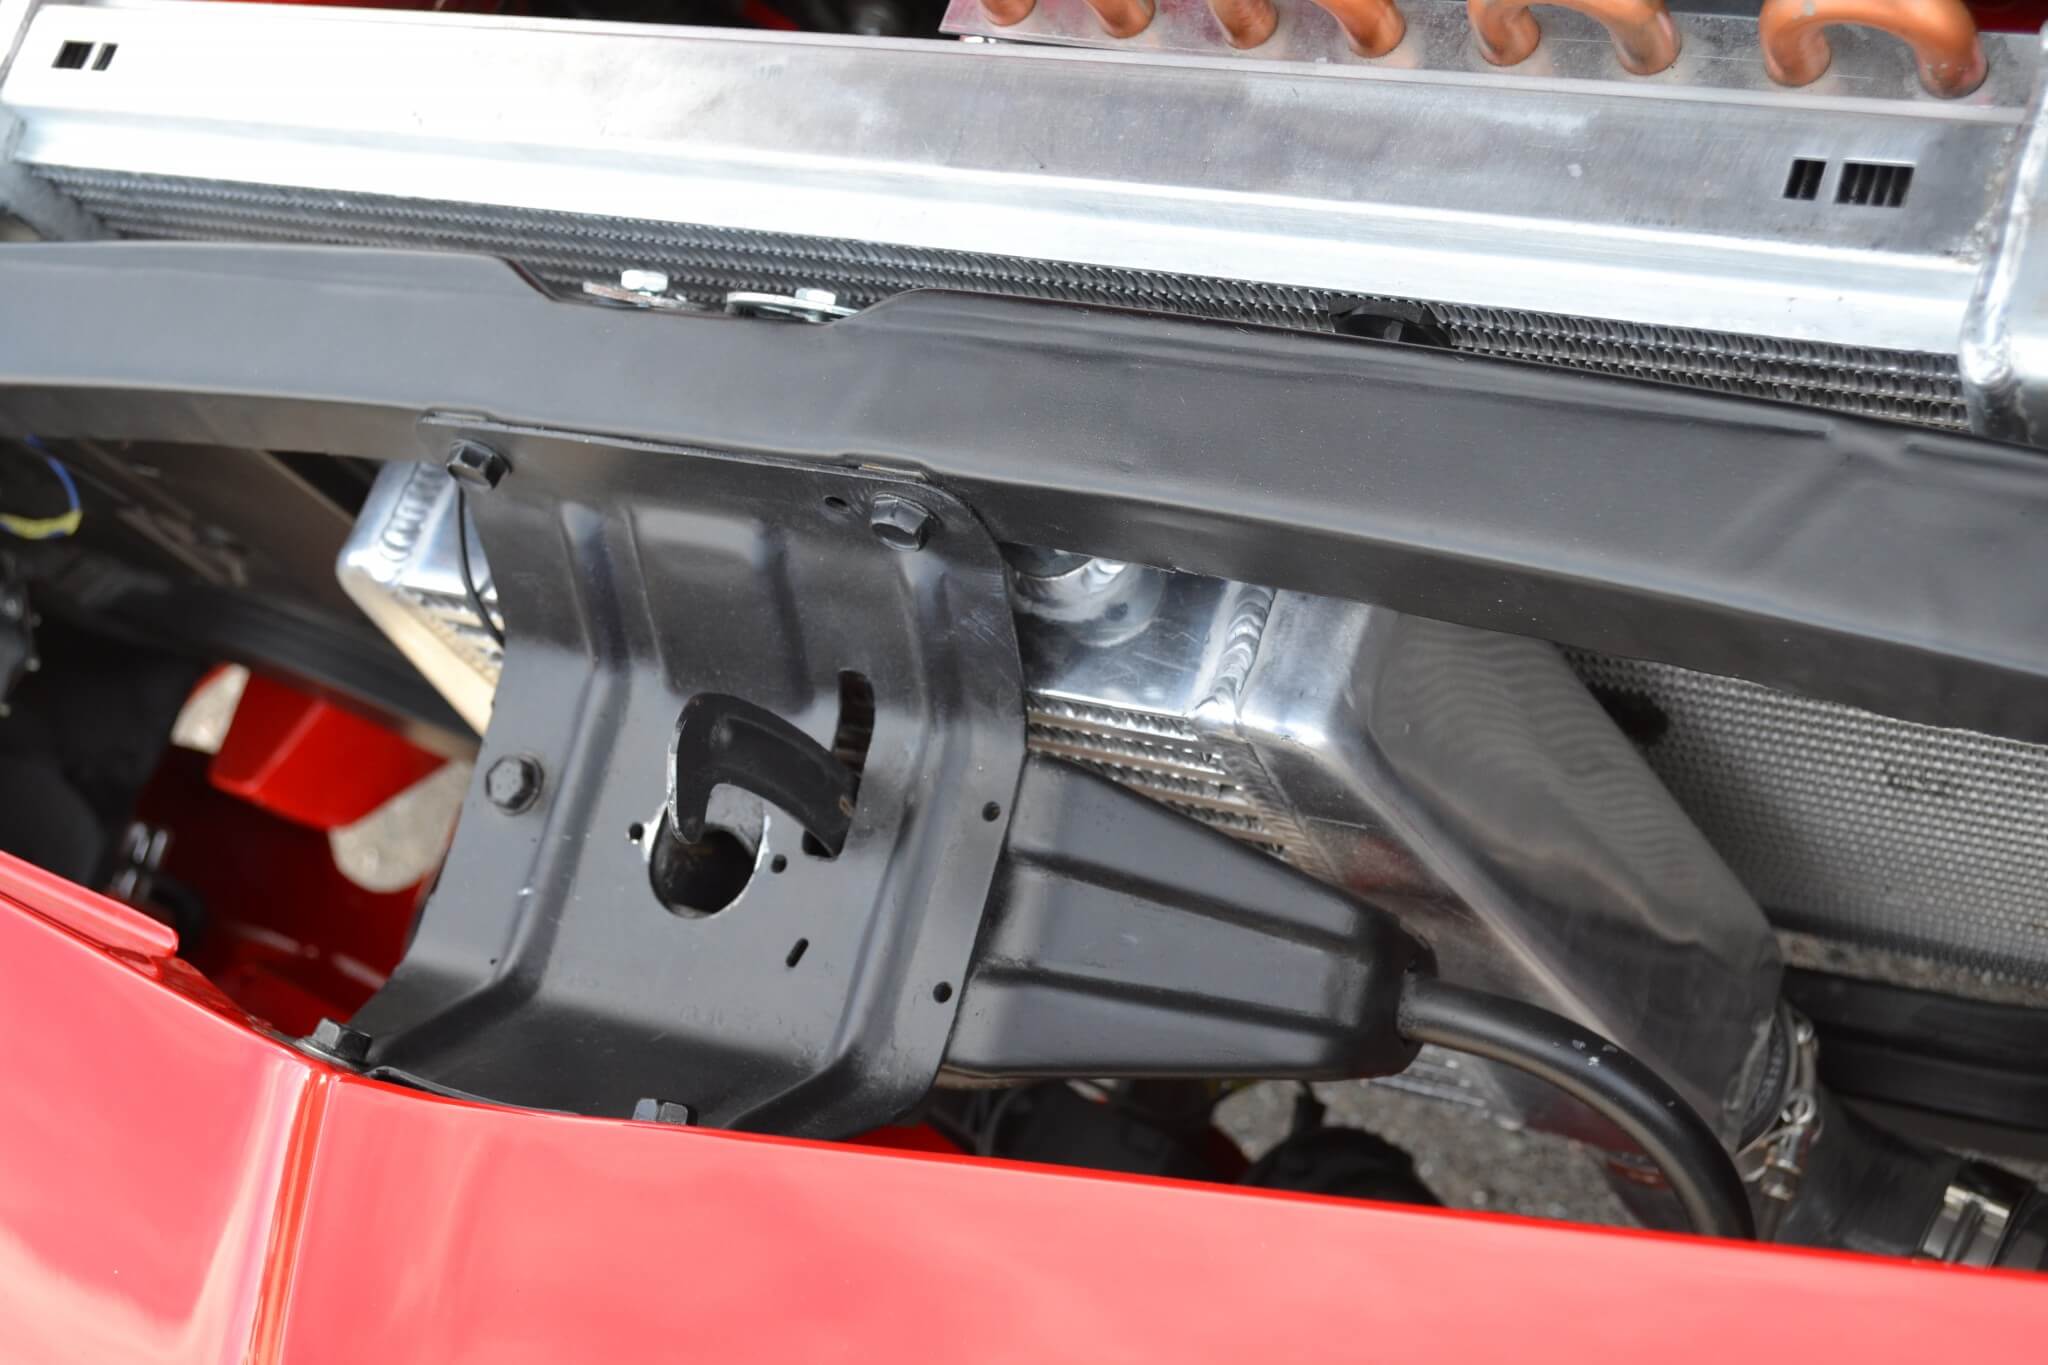 Since the stock intercooler obviously wouldn't fit behind the Camaro grille, a CXRacing universal intercooler was mounted to cool the air exiting the turbocharger.